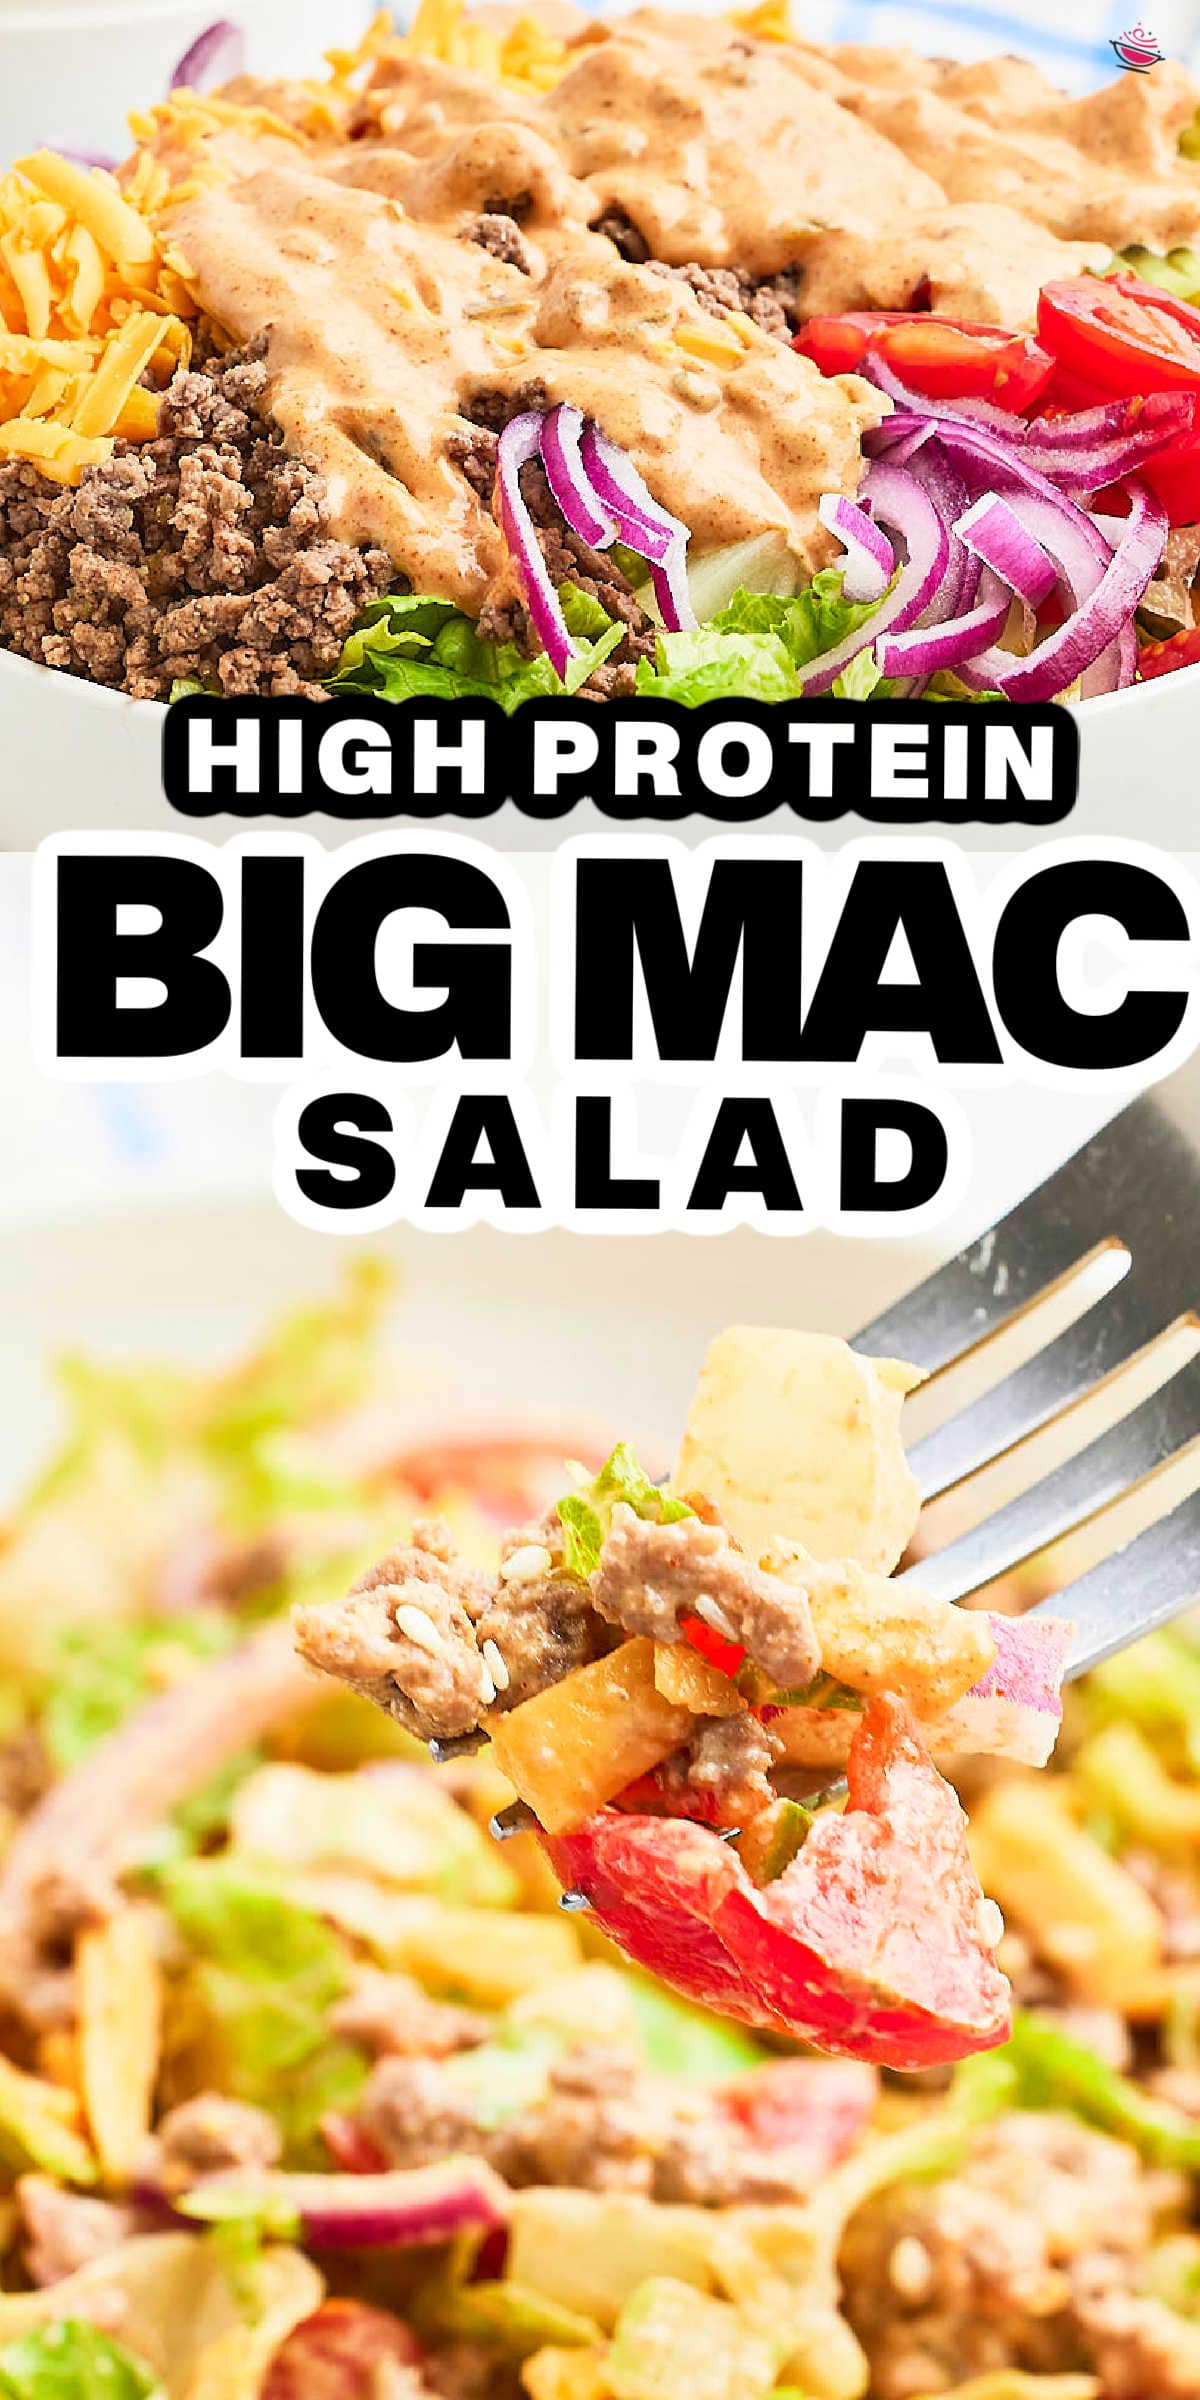 Who says salads have to be boring? Swap your burger for a bowl and dive into this delicious homemade Big Mac salad. It's loaded with all the classic flavors you love - juicy beef, sharp cheddar cheese, crunchy pickles, and a spot-on Big Mac sauce that you can whip up right at home. #cheerfulcook #copycatrecipe #bigmacsalad #groundbeefsalad #betterthantakeout #easyrecipes #salad via @cheerfulcook